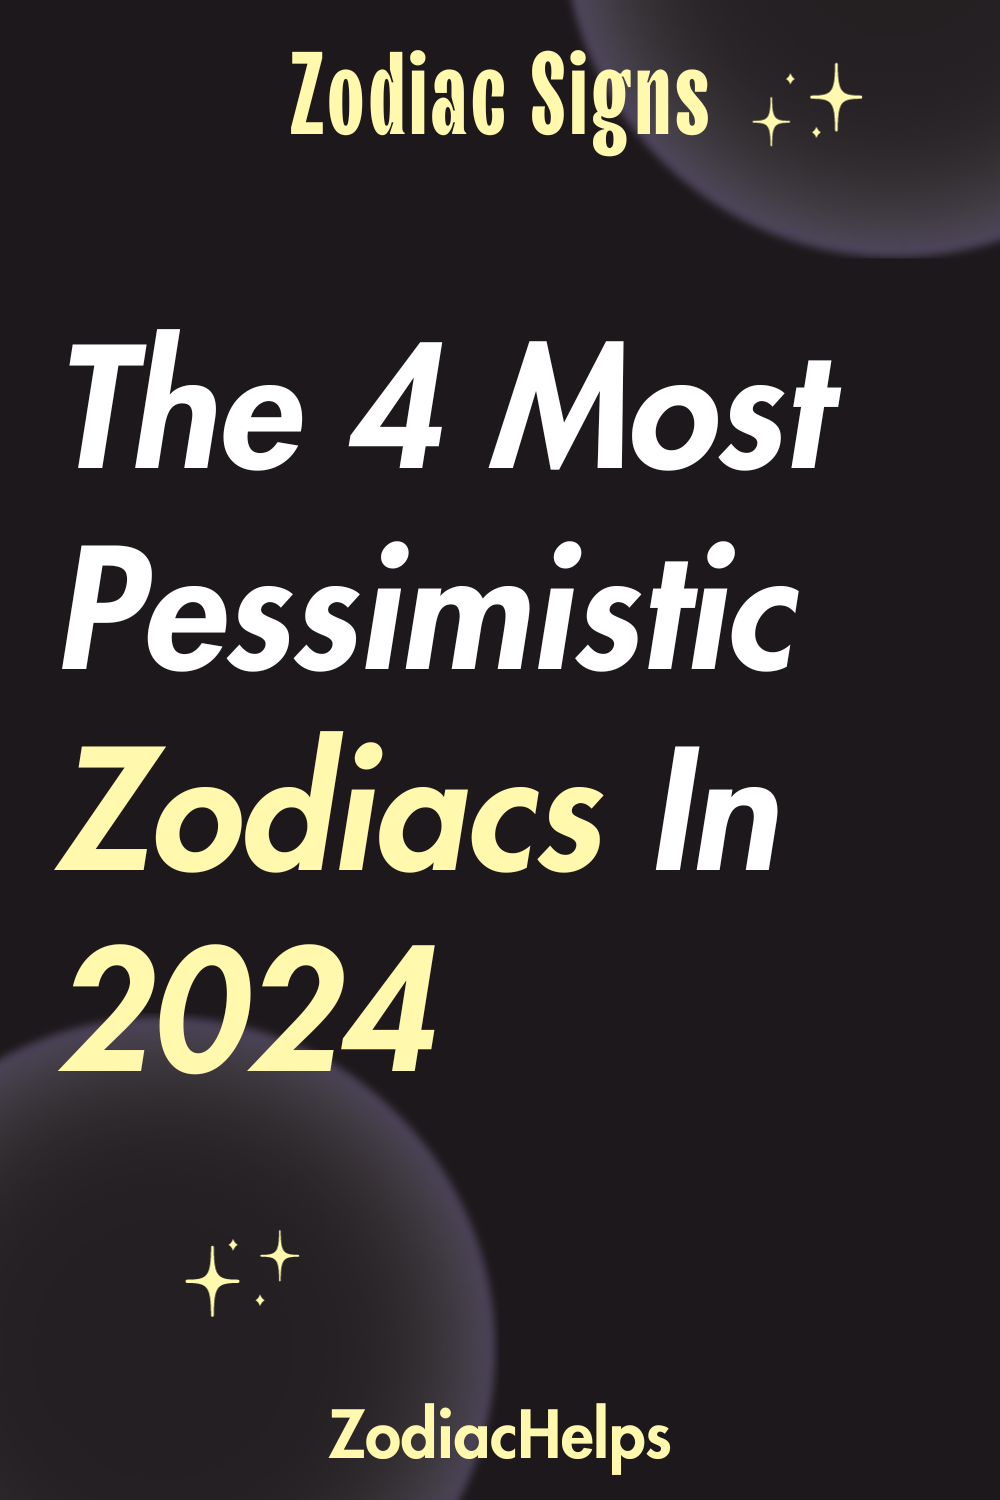 The 4 Most Pessimistic Zodiacs In 2024